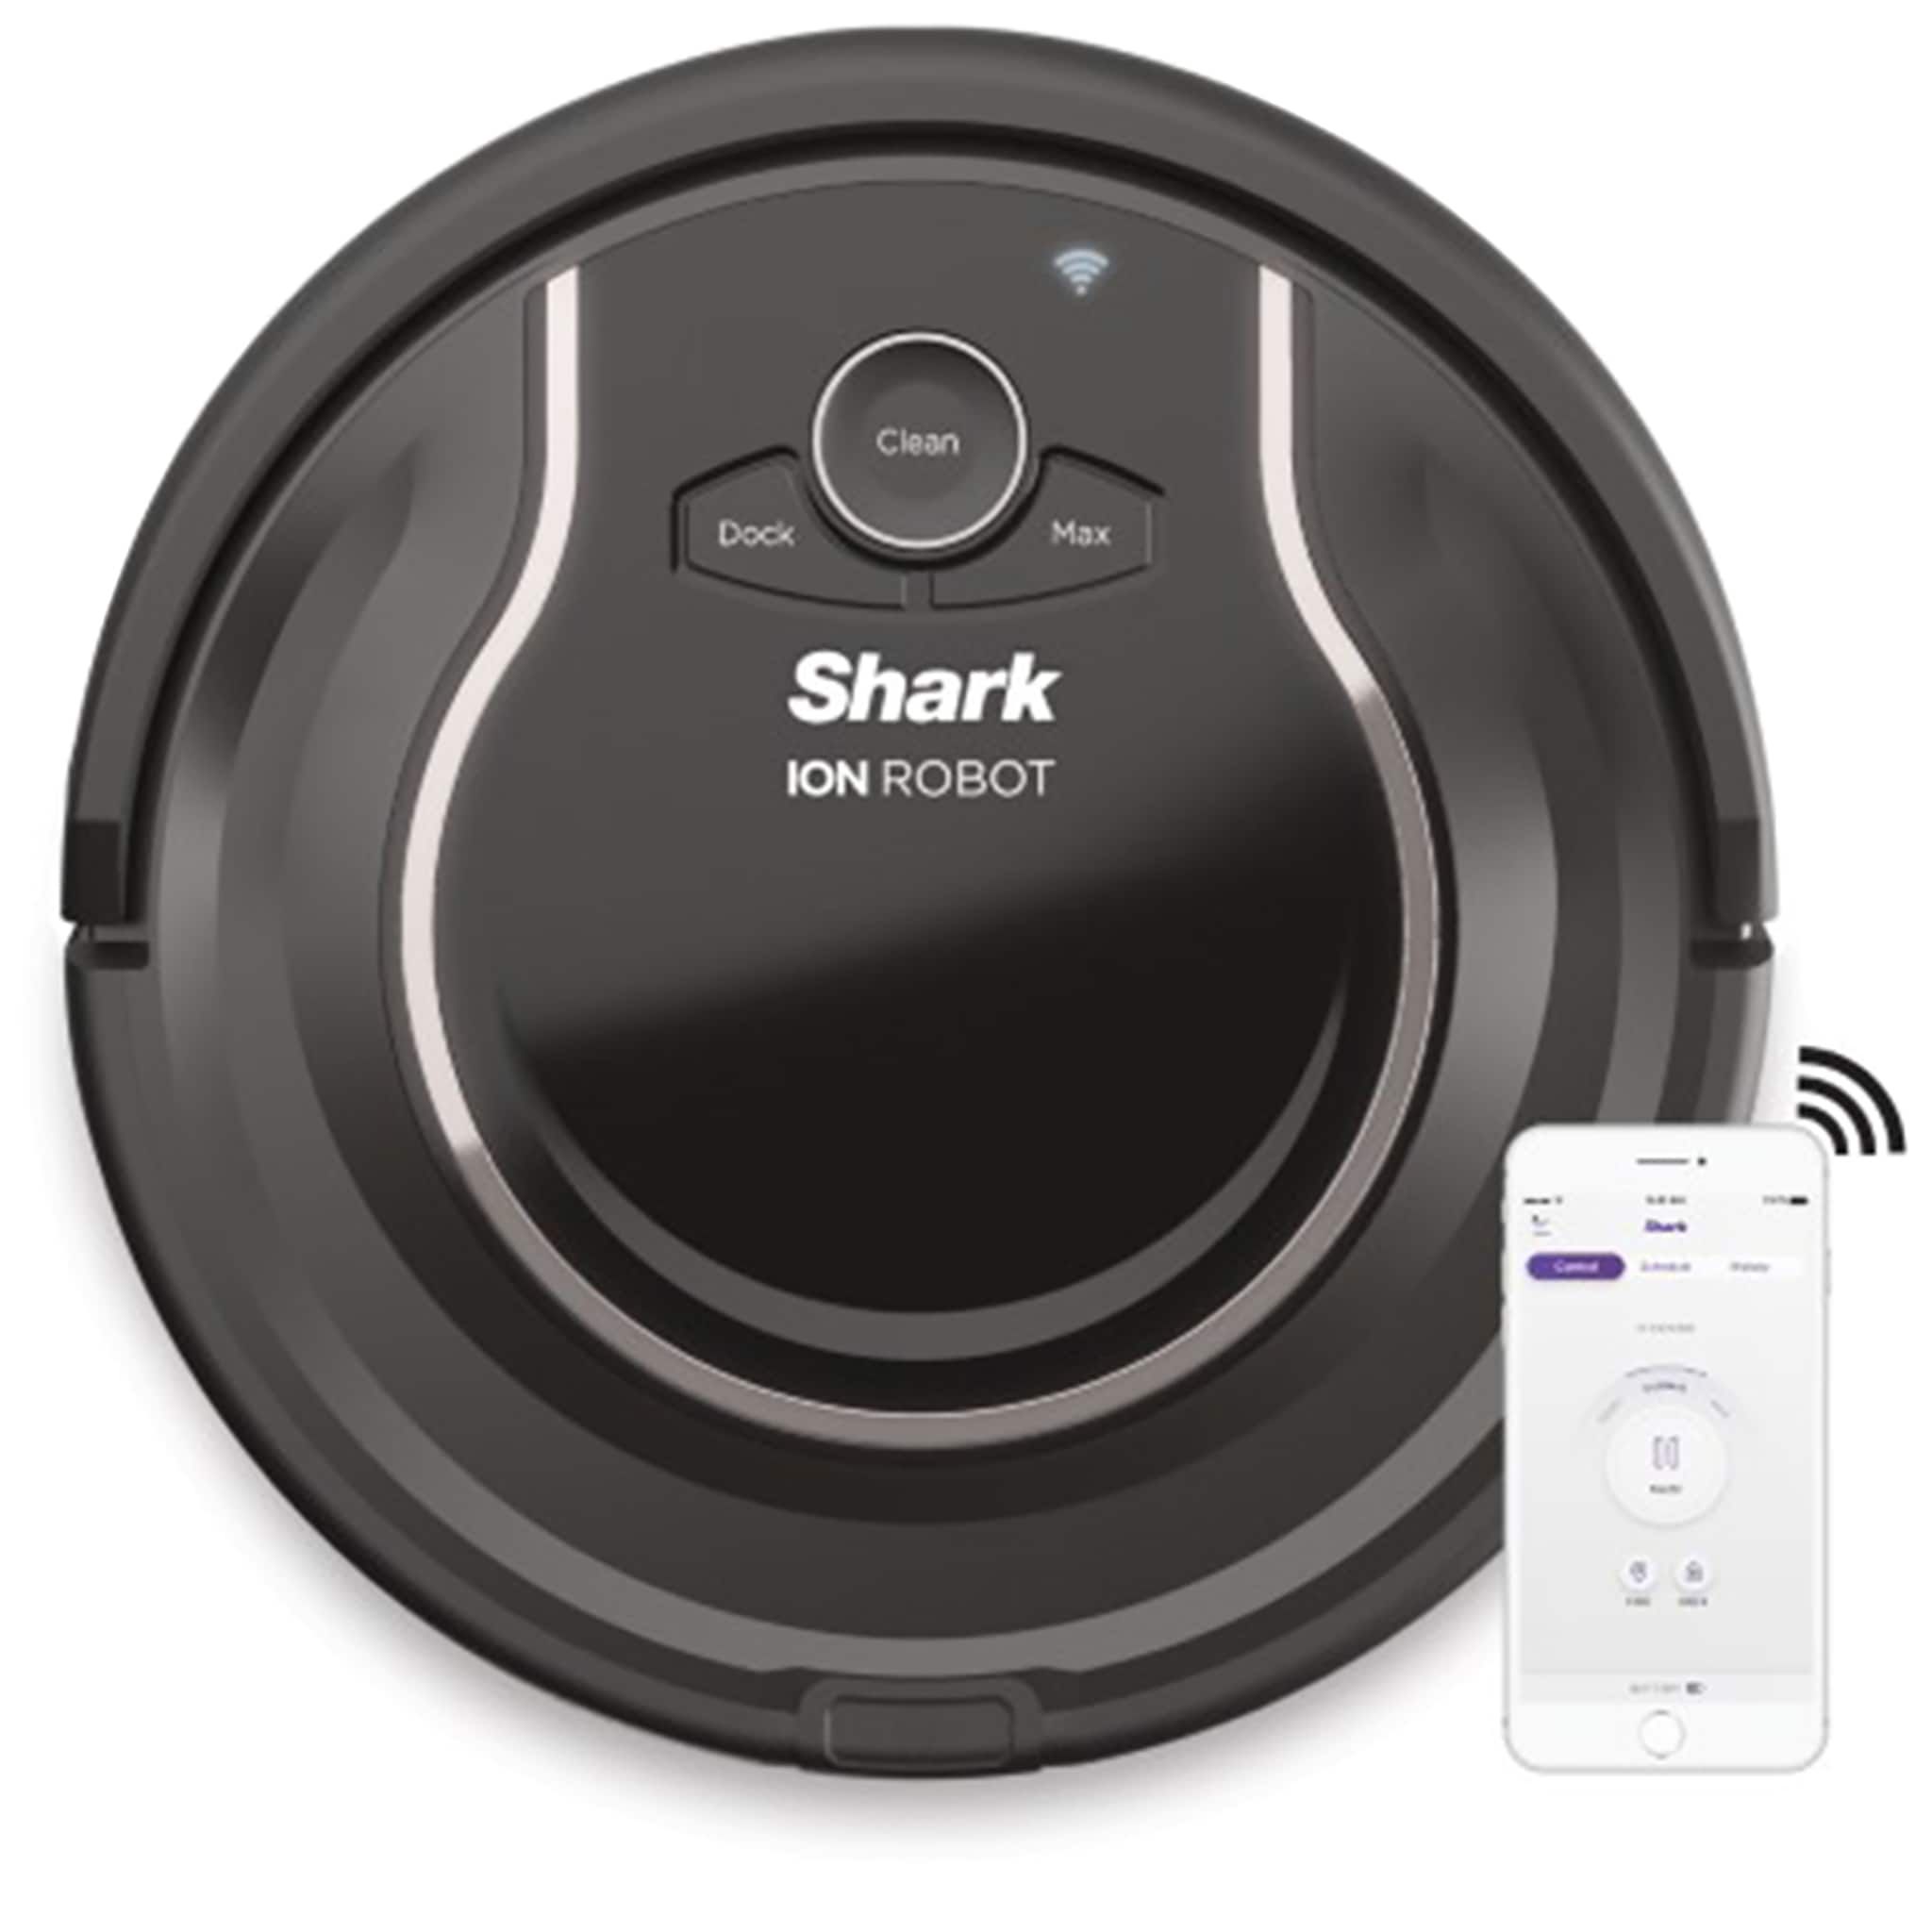 ION ROBOT R75 Vacuum with Wi-Fi Connectivity and Voice Control